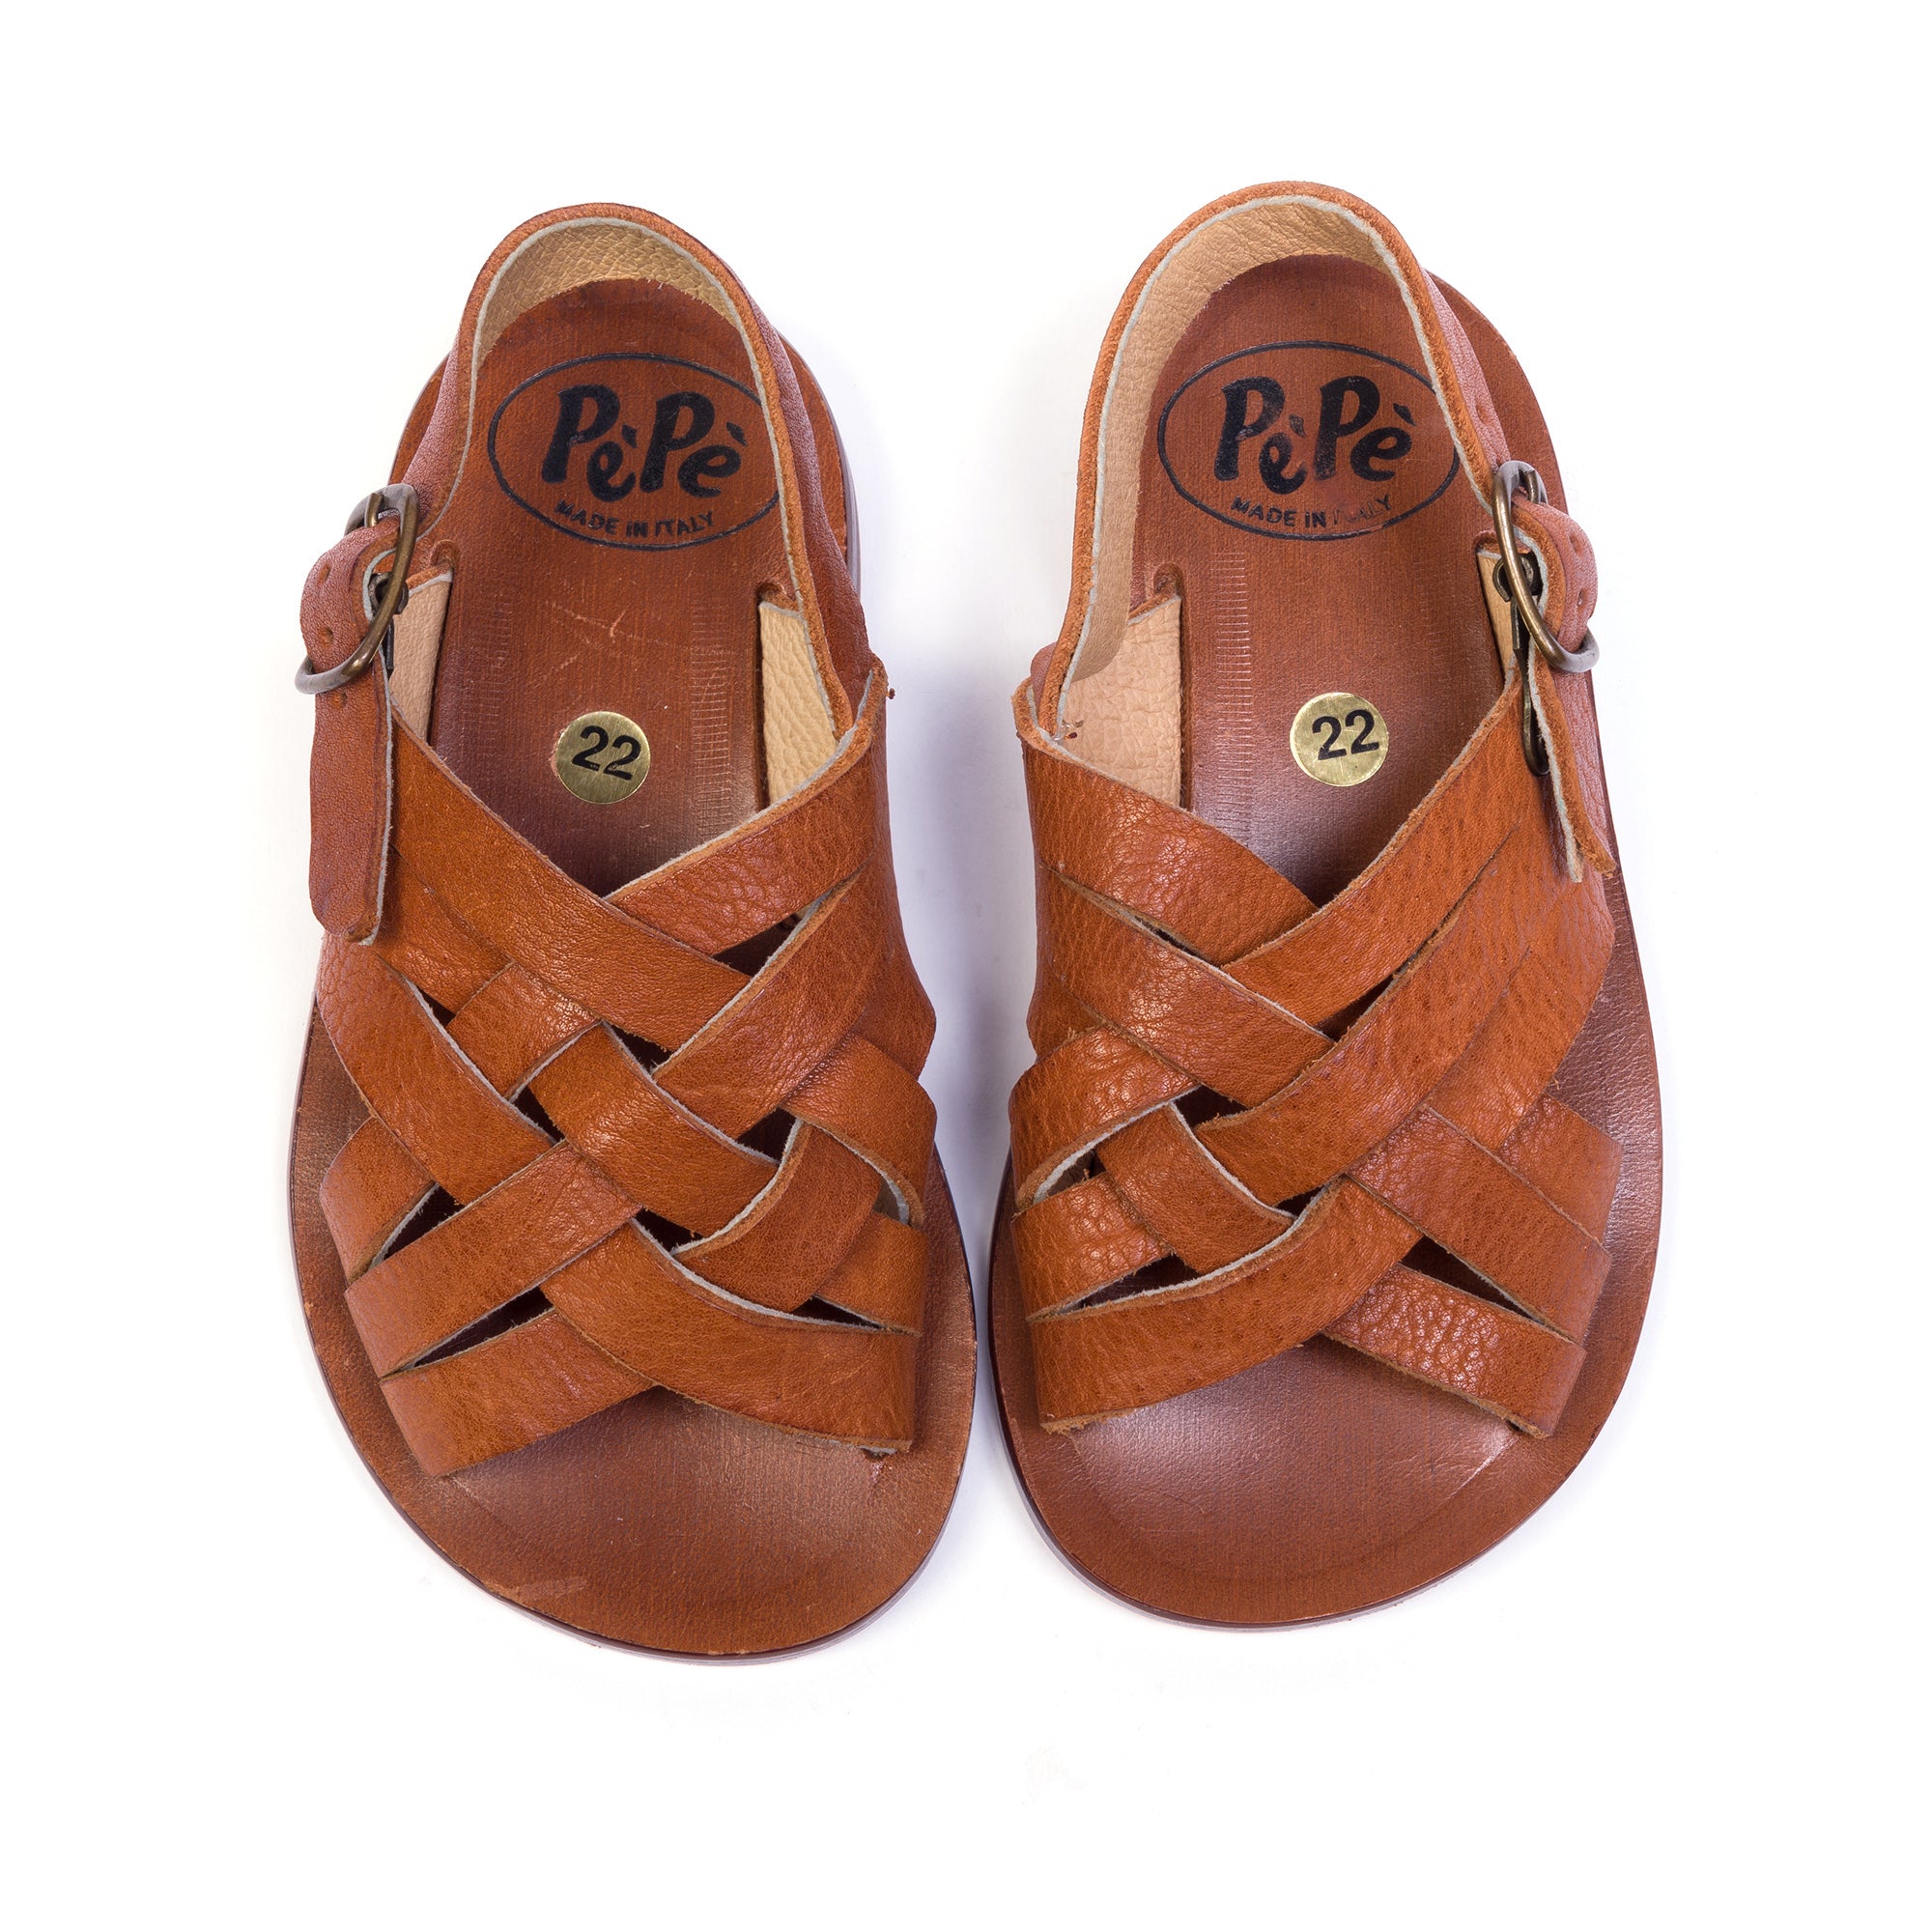 Boys & Girls Brown Leather Sandals